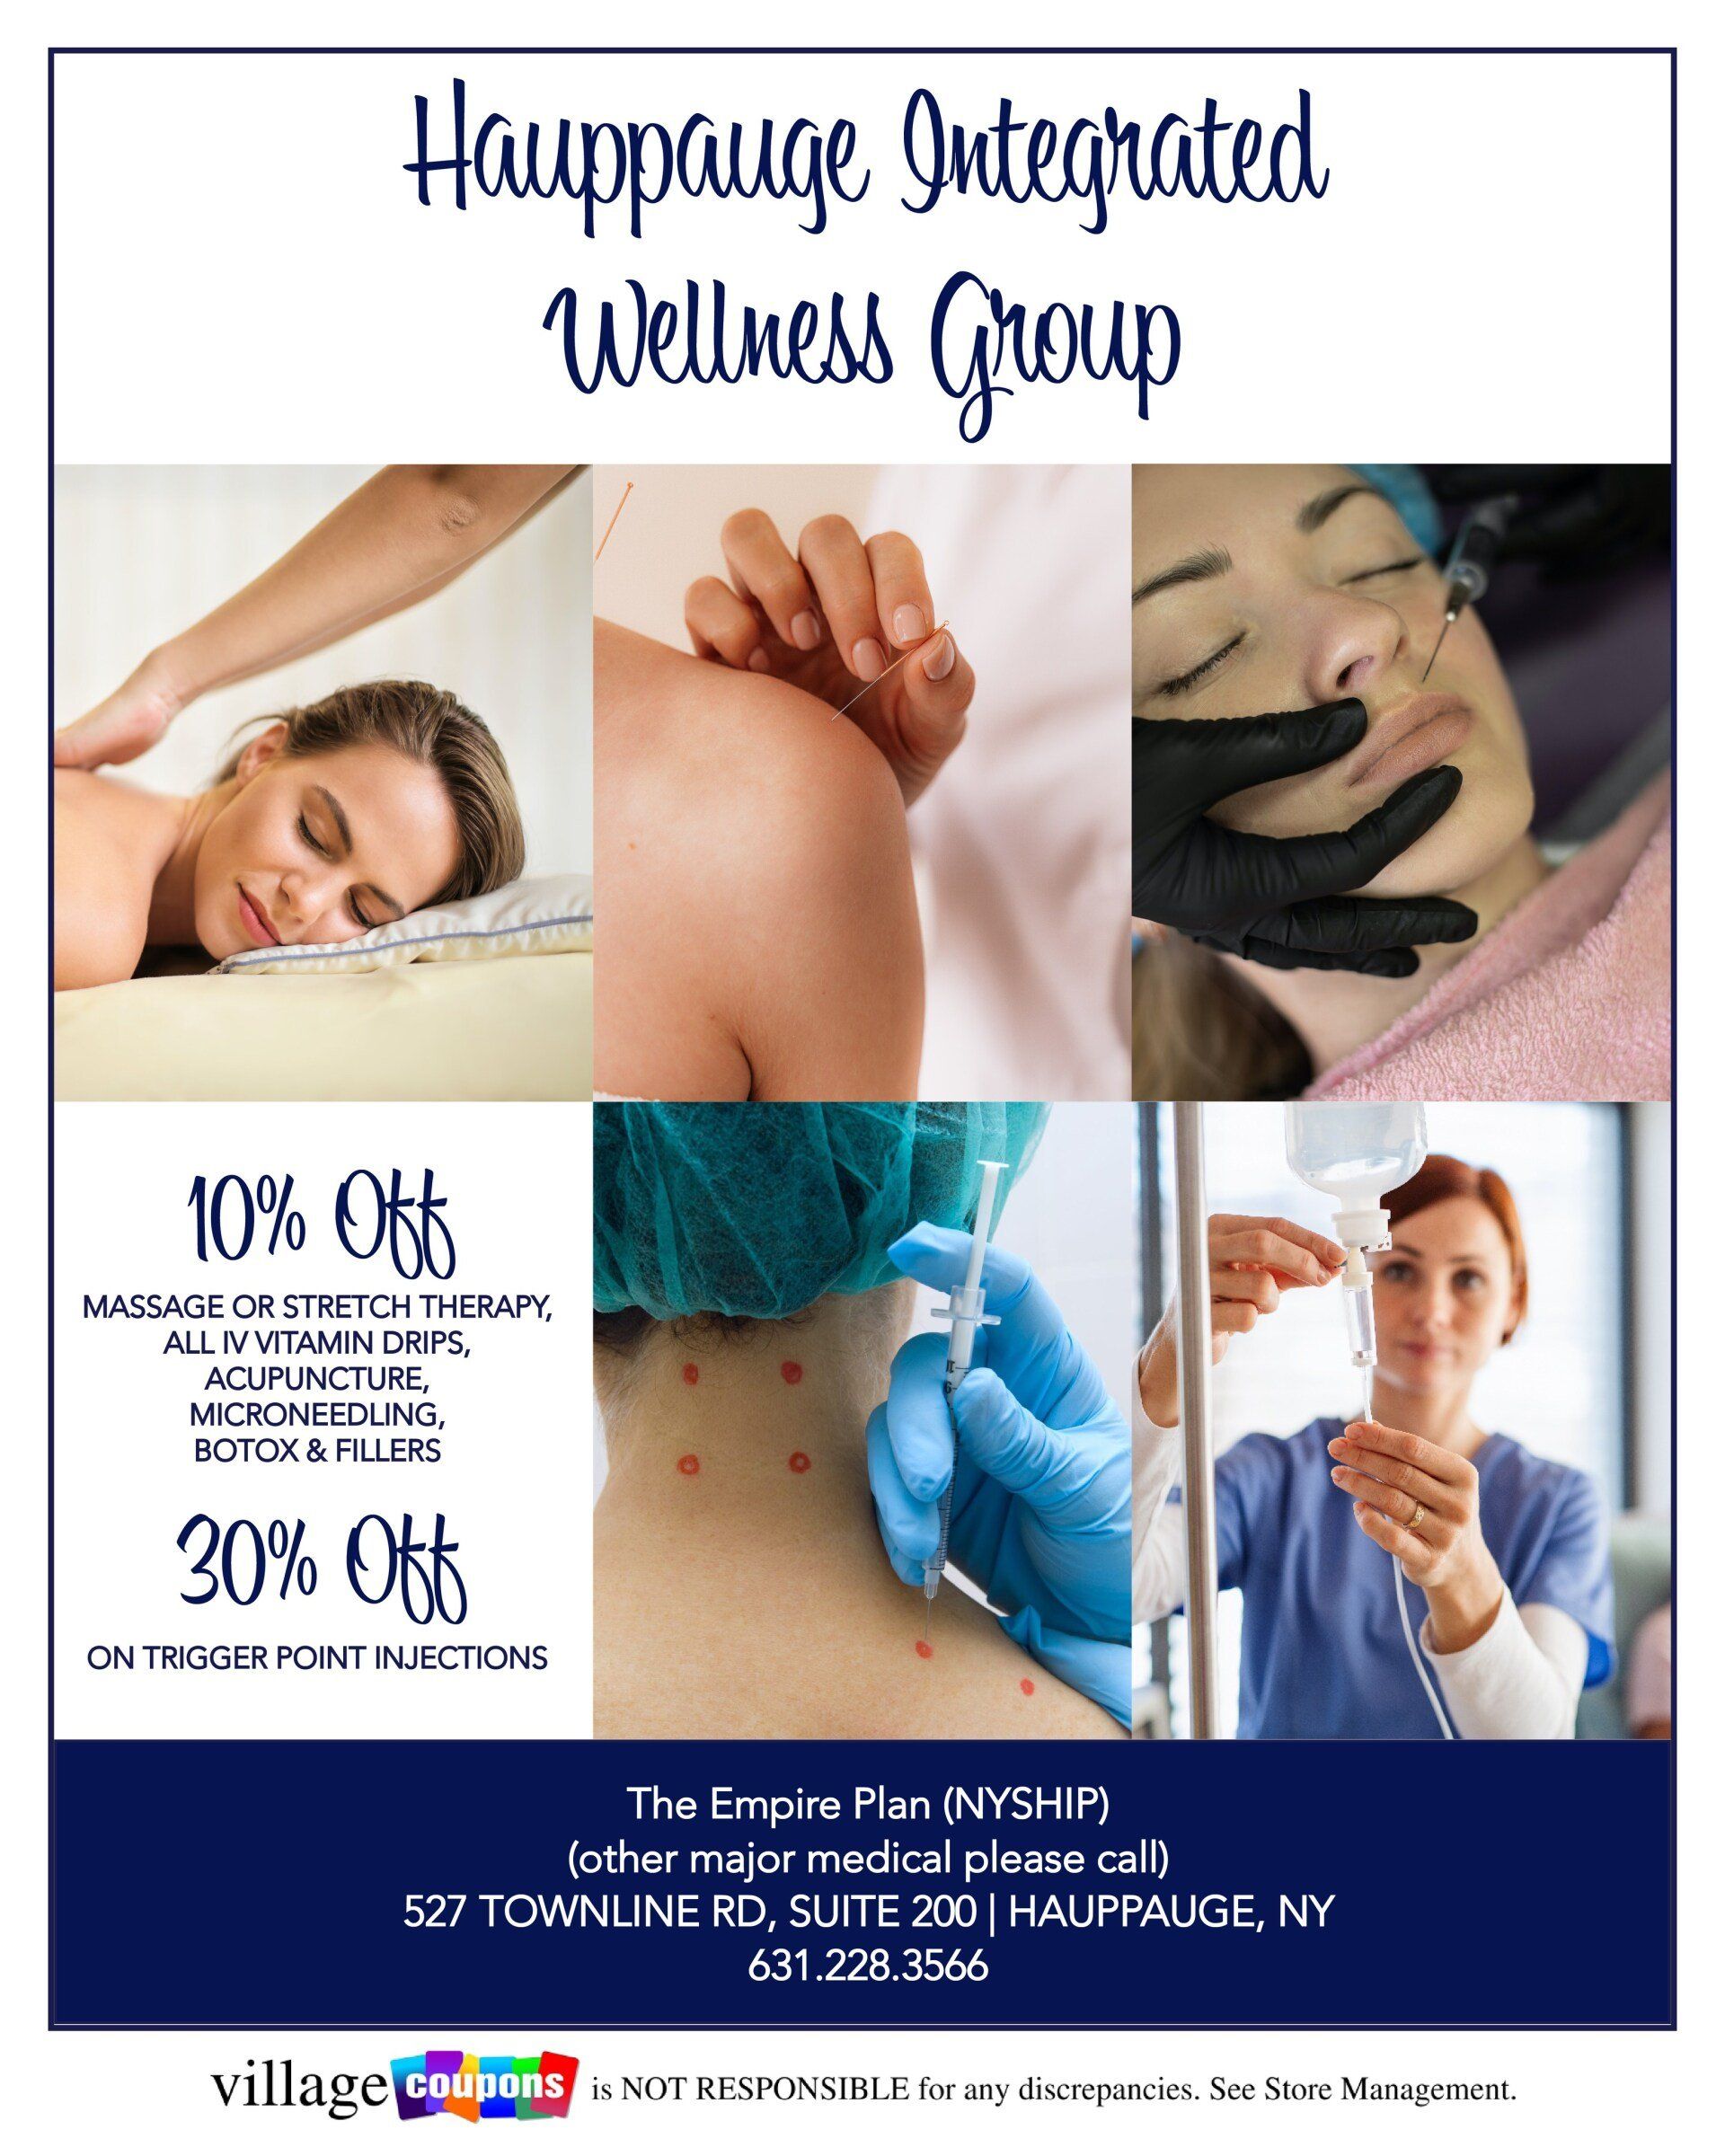 An advertisement for a wellness group shows a woman getting acupuncture